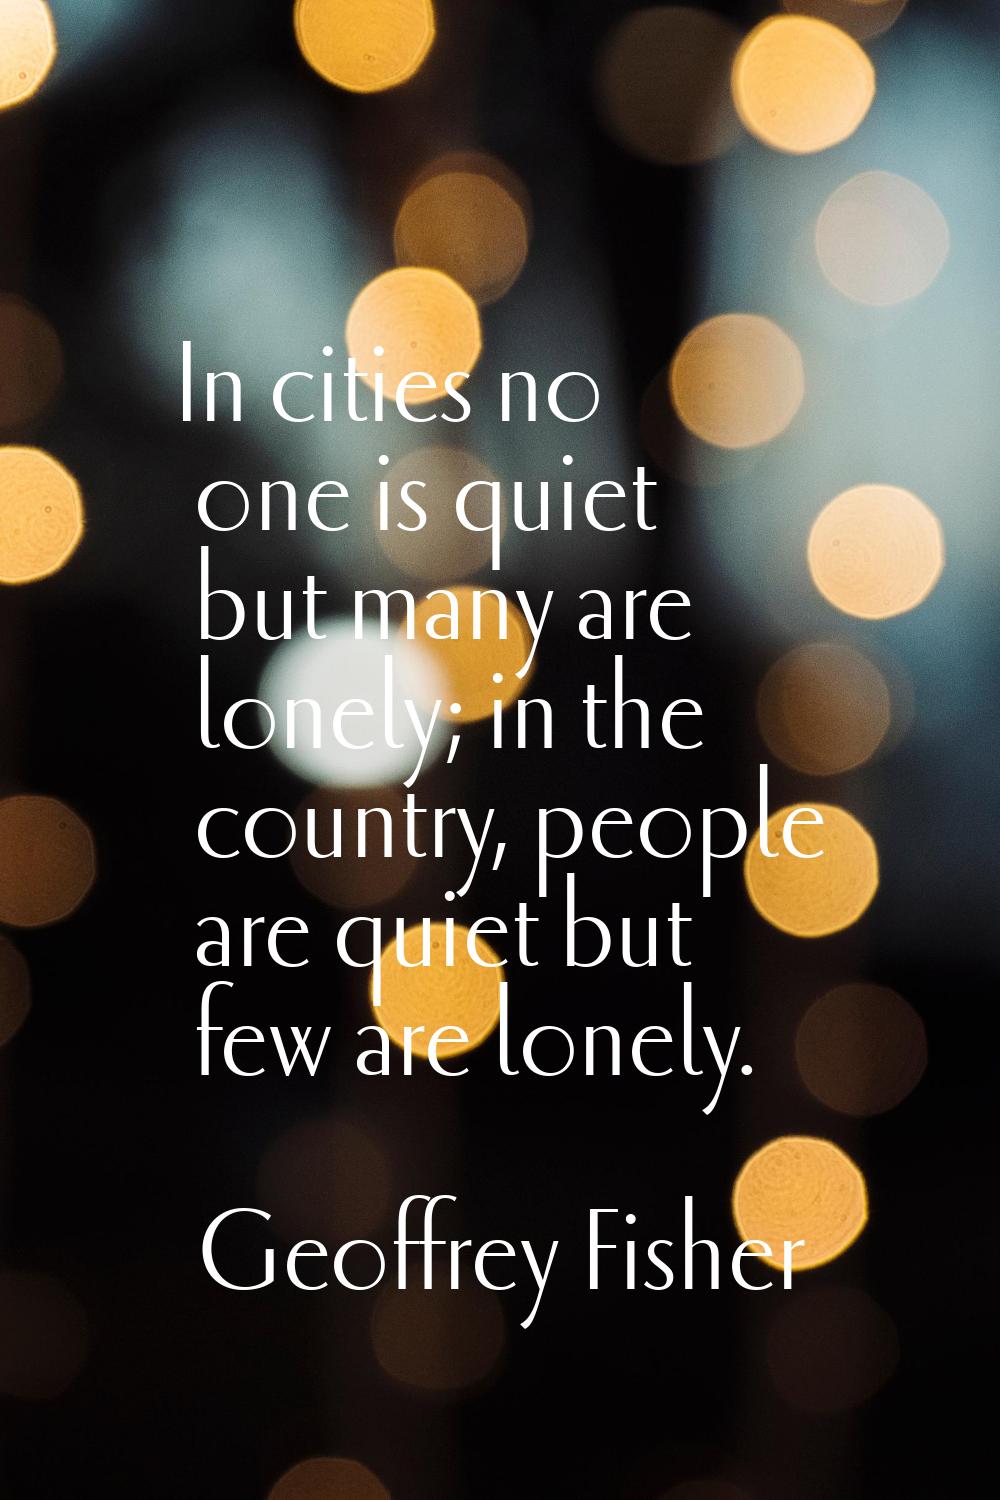 In cities no one is quiet but many are lonely; in the country, people are quiet but few are lonely.